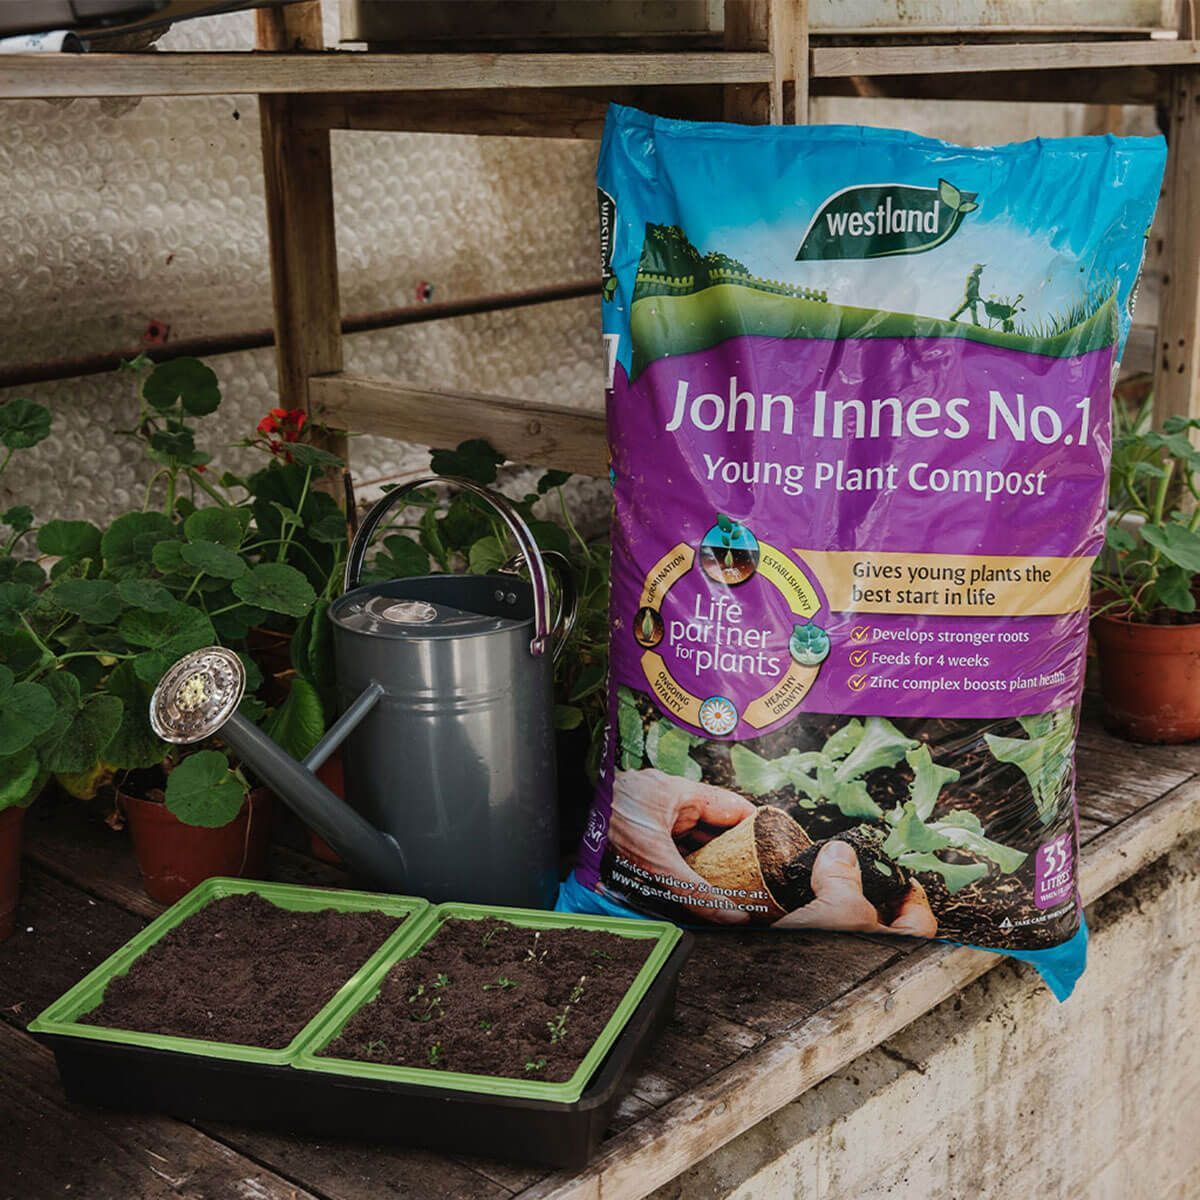 Tigerbox 3 x 10 Litre Levington John Innes No.1 Compost Seedlings Young Plants Cuttings with Antibacterial Pen 